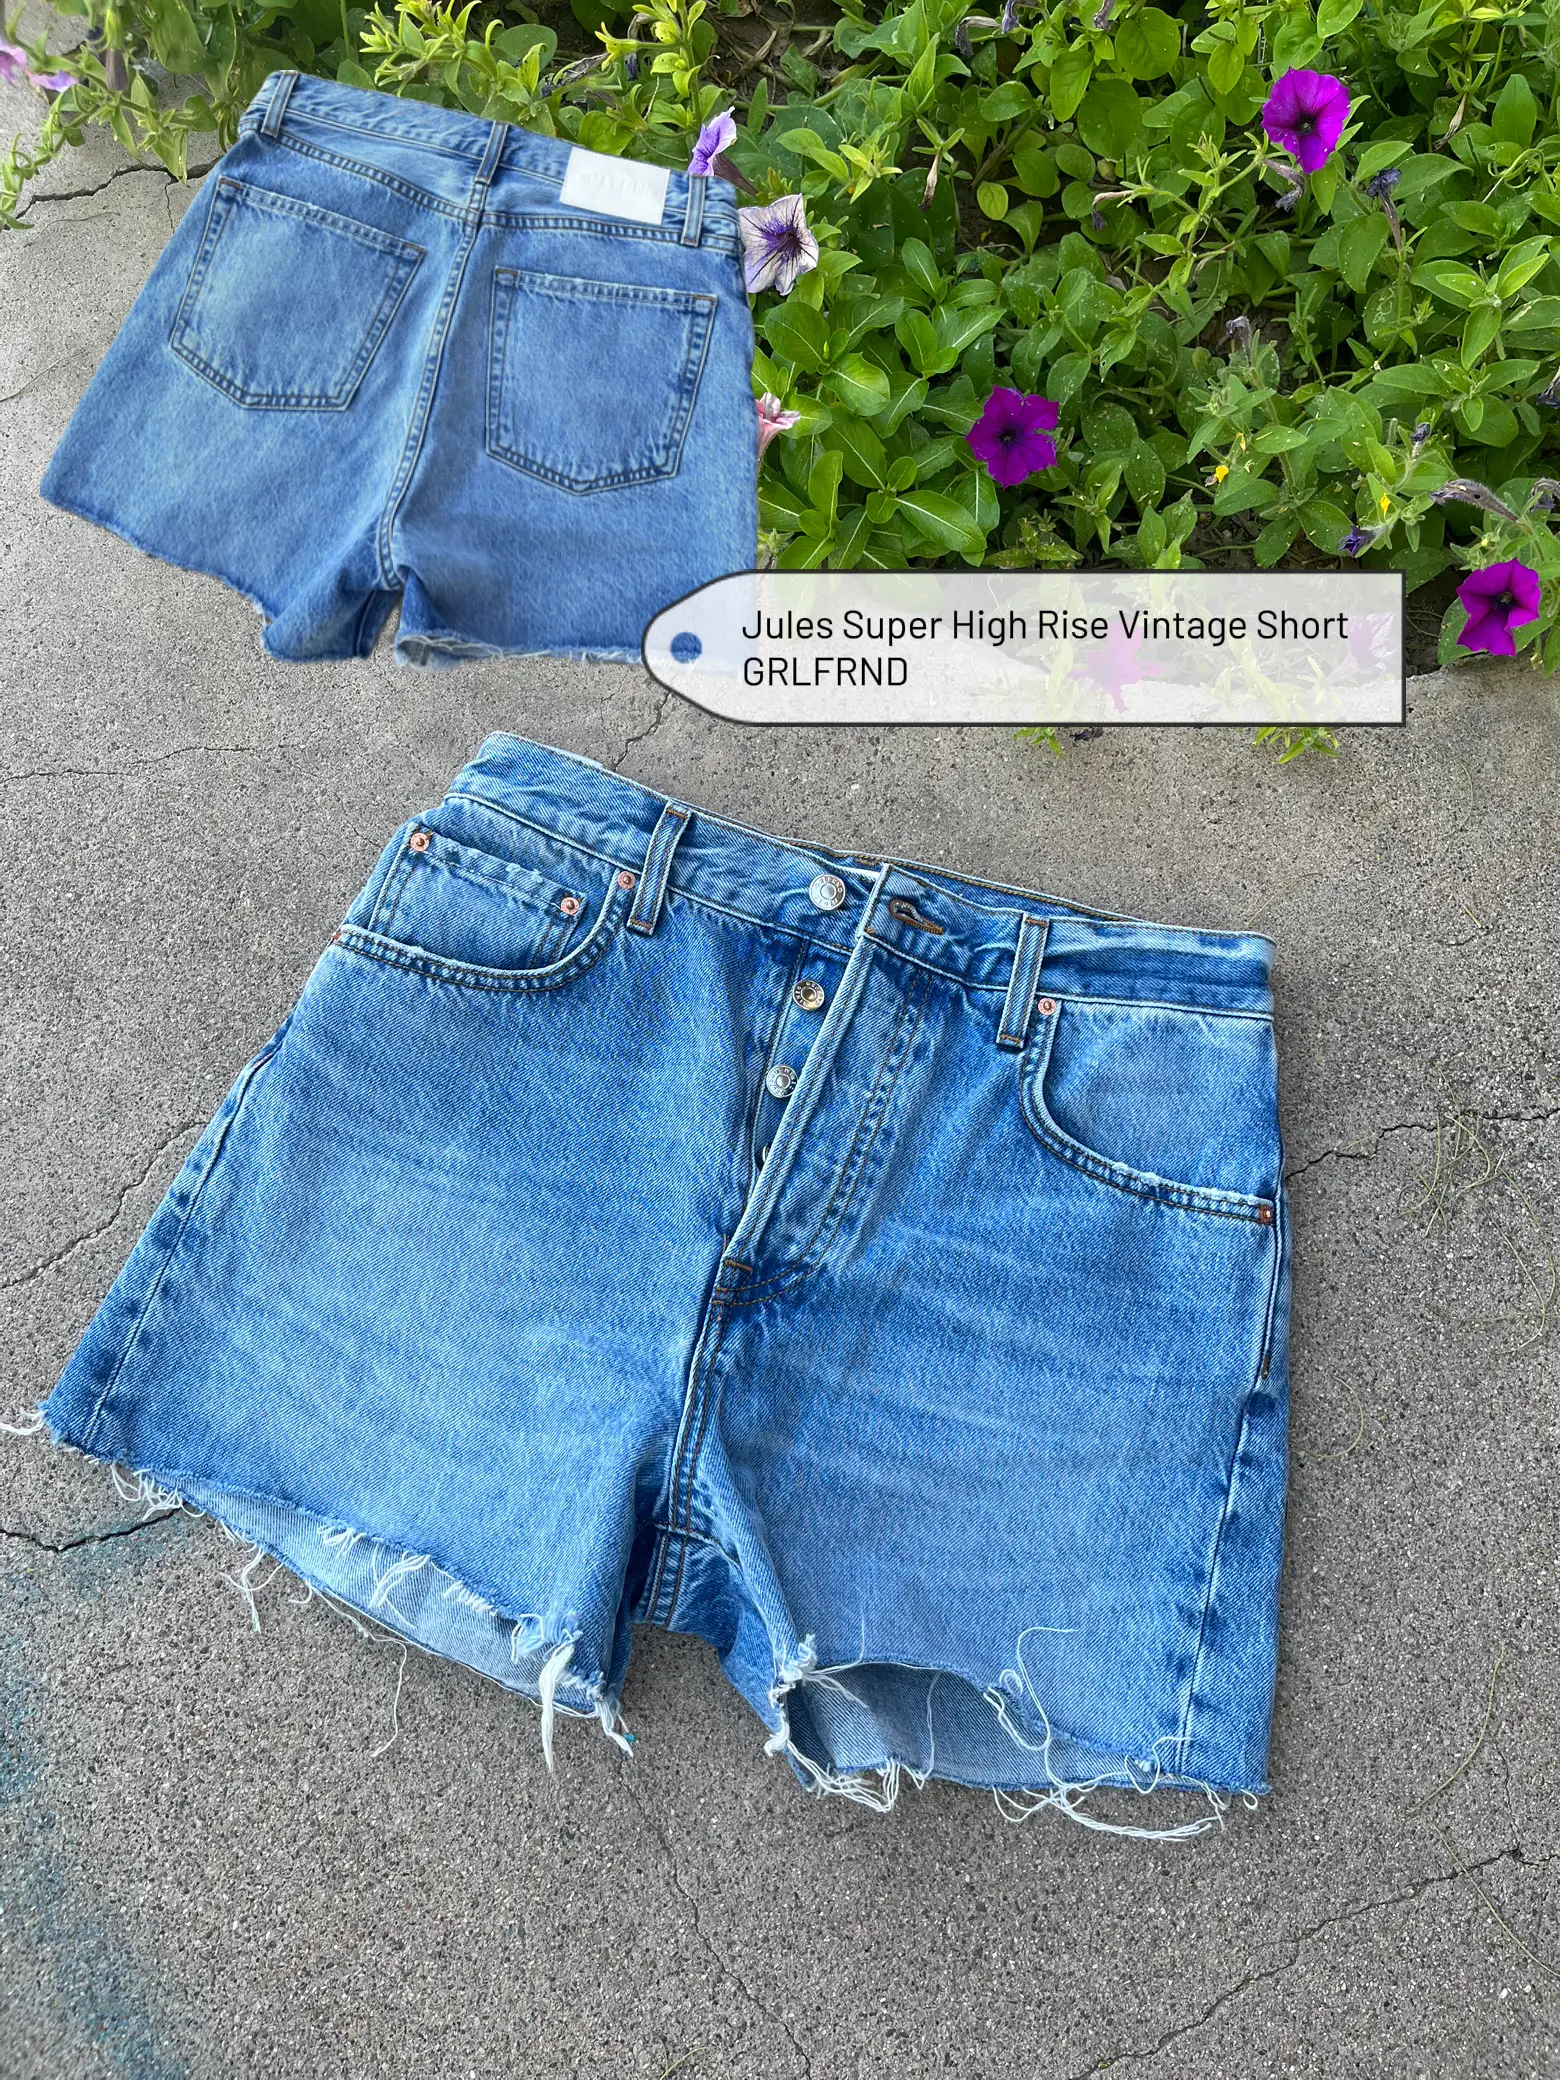 Basic difference between skinny jeans and jegging, #shorts